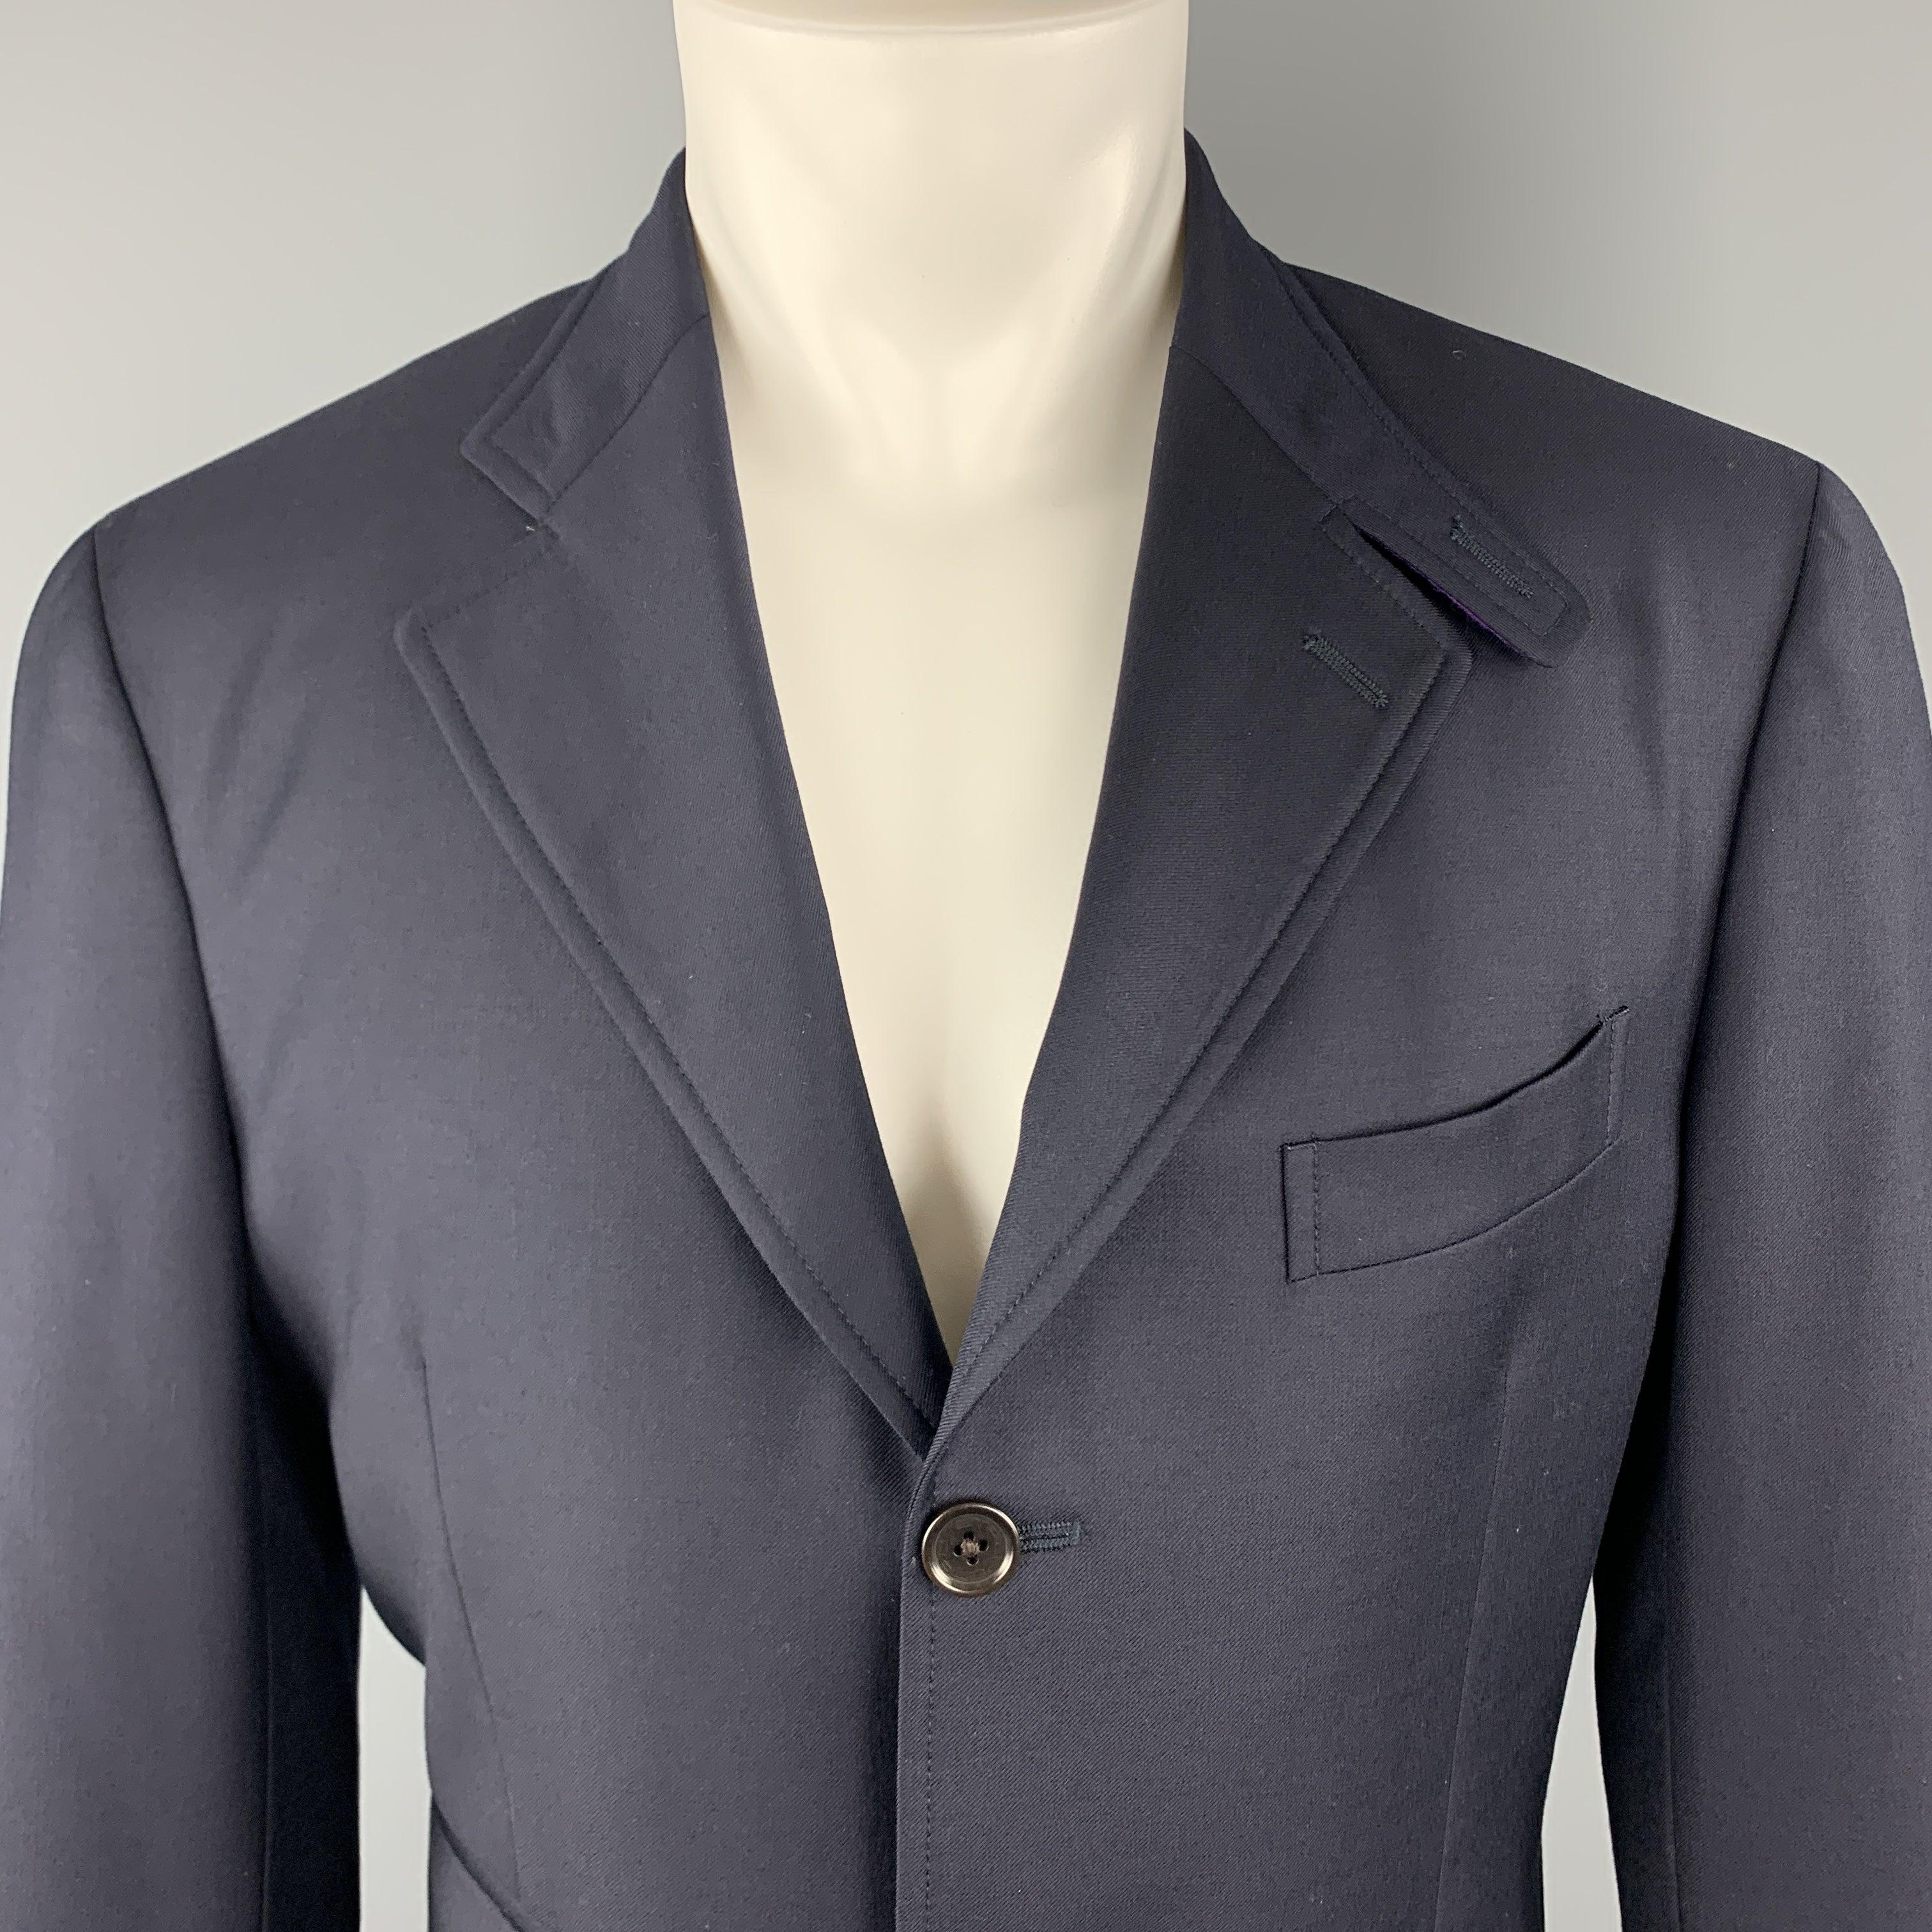 ETRO
sport coat comes in navy wool twill with a notch tab lapel, single breasted, three button front, and purple collar liner. Made in Italy.Excellent Pre-Owned Condition. 

Marked:   IT 50 

Measurements: 
 
Shoulder:17 inches Chest:
42 inches